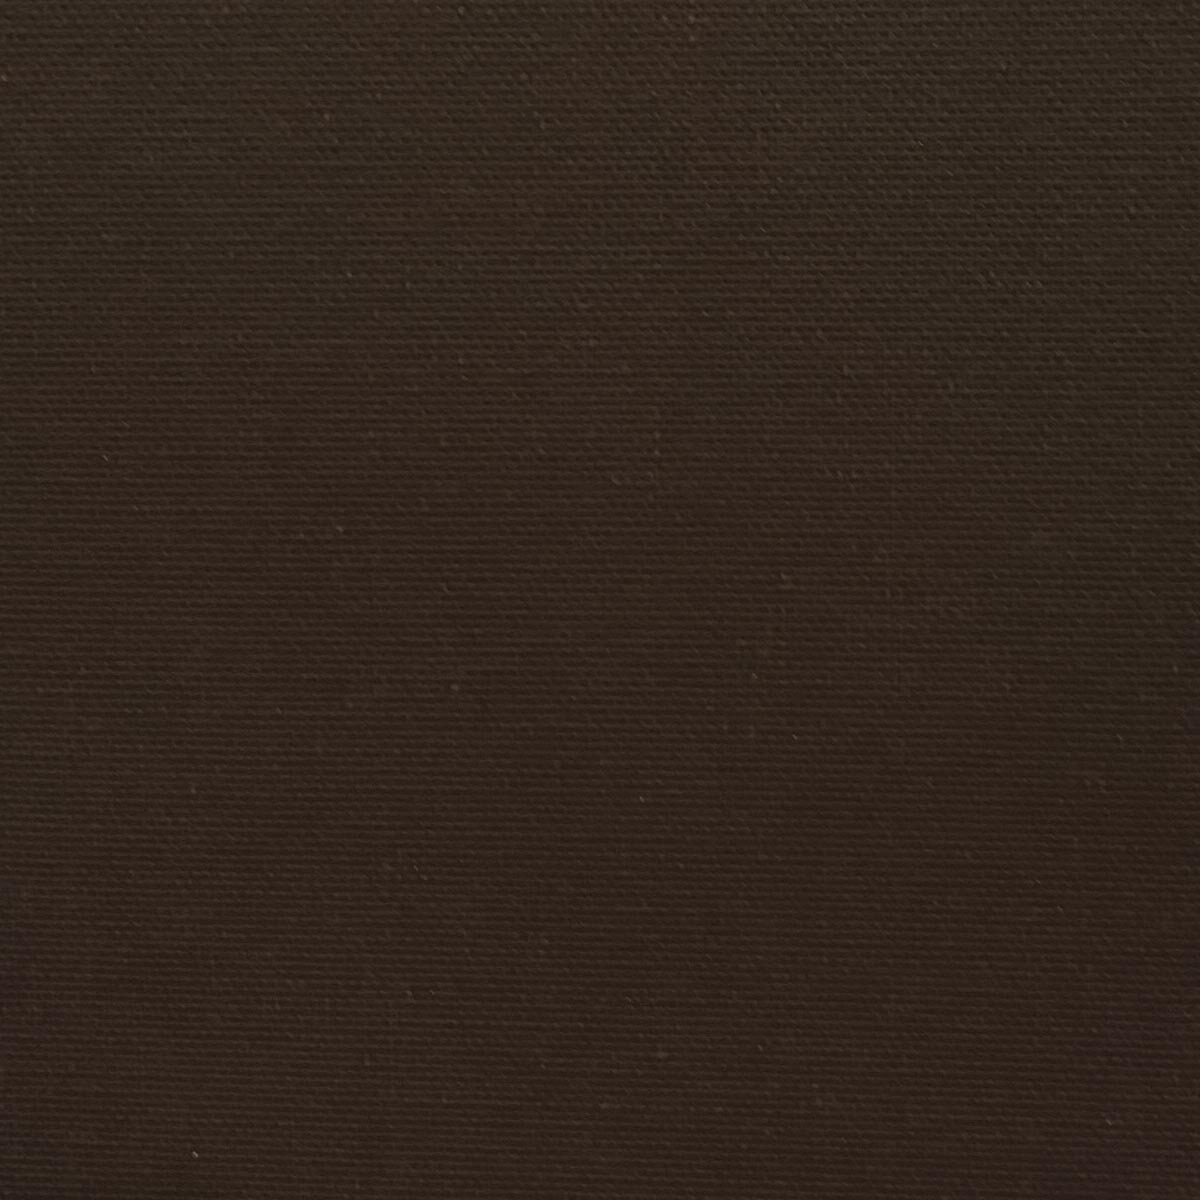 Persiana Enrollable Black Out Night Fall 1.00 X 2.40 Cocoa Classic